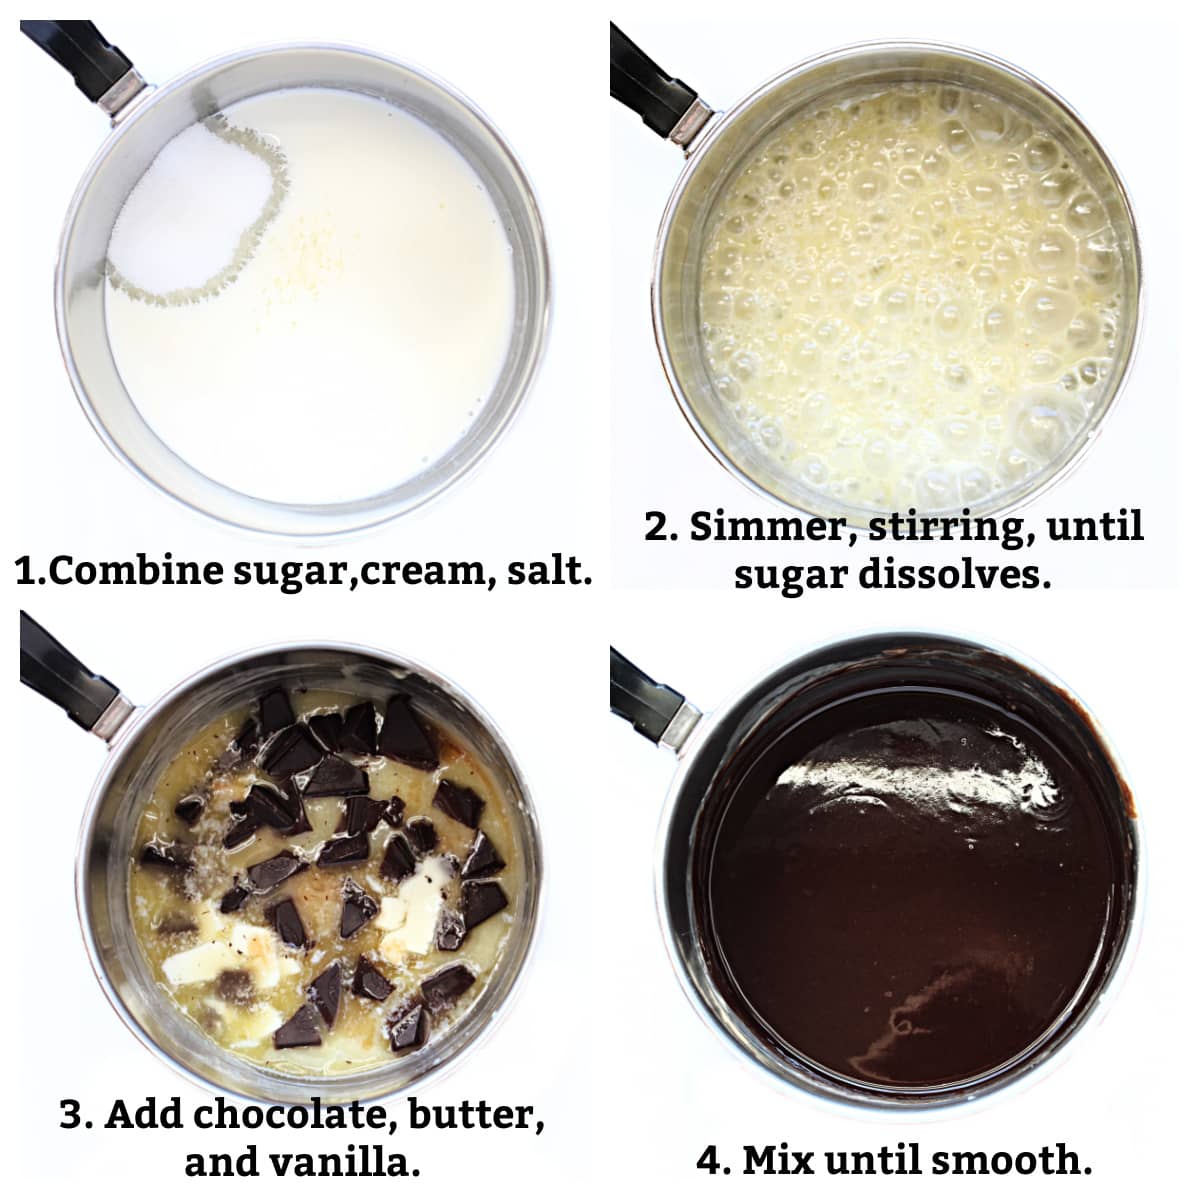 Filling Instructions labeled; combine sugar, cream, salt, simmer, add chocolate, butter, vanilla, mix until smooth.